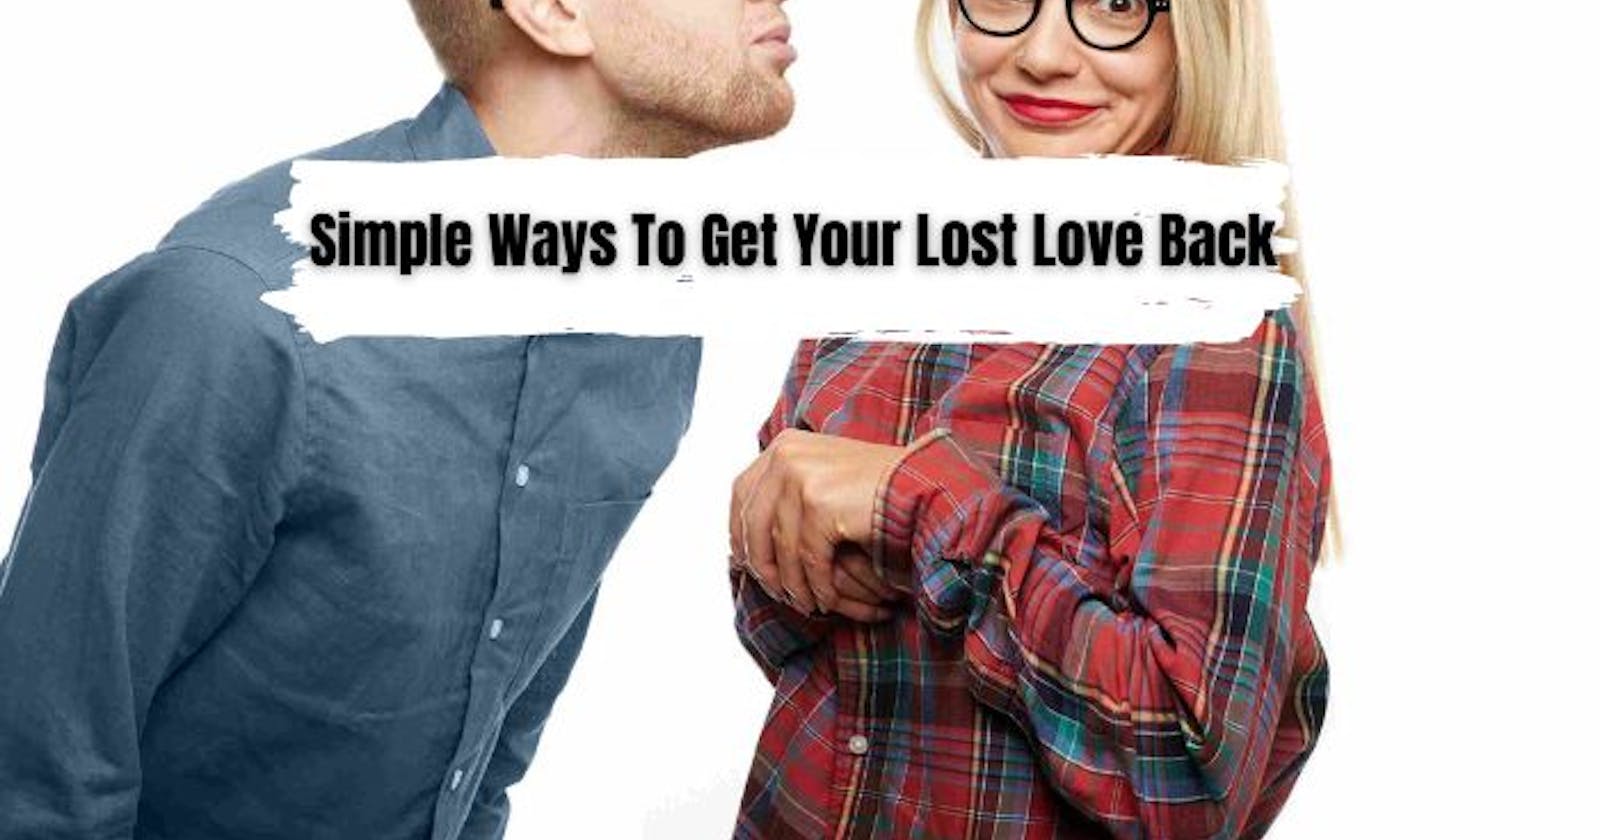 Simple Ways To Get Your Lost Love Back